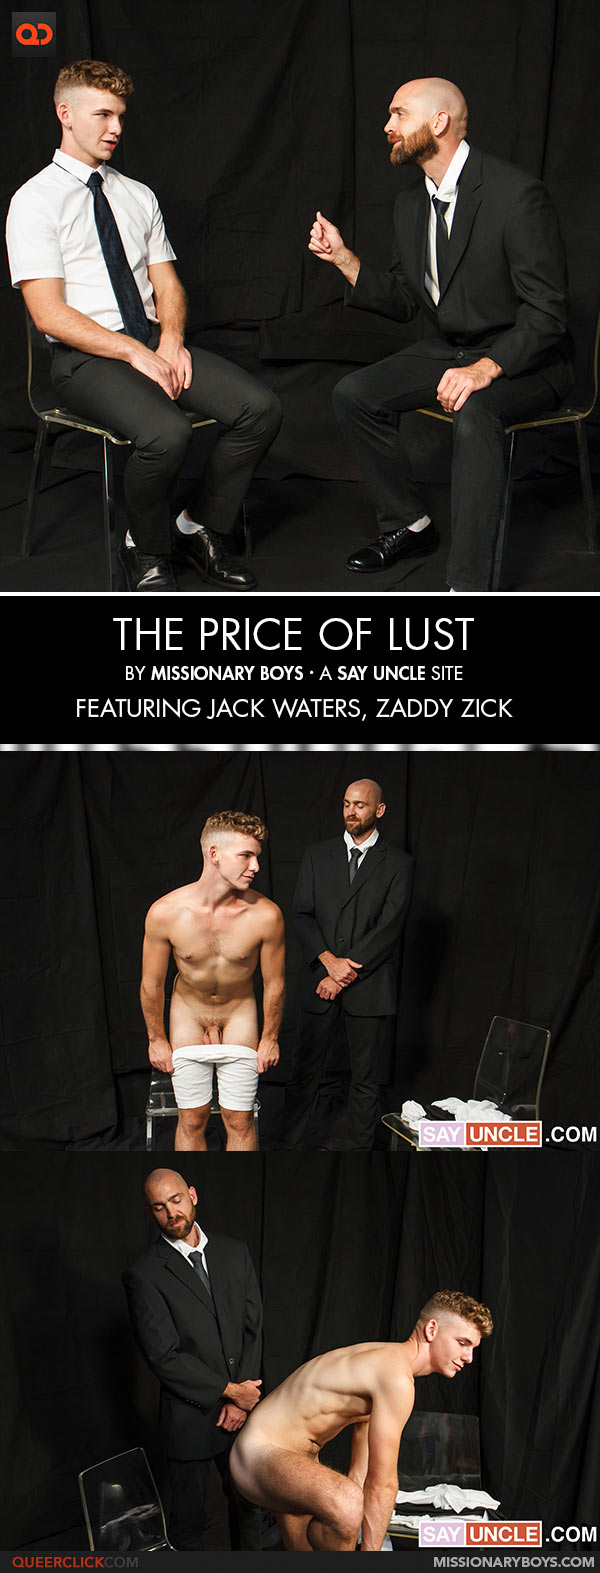 Say Uncle | MissionaryBoys: Jack Waters and Zaddy Zick - The Price of Lust